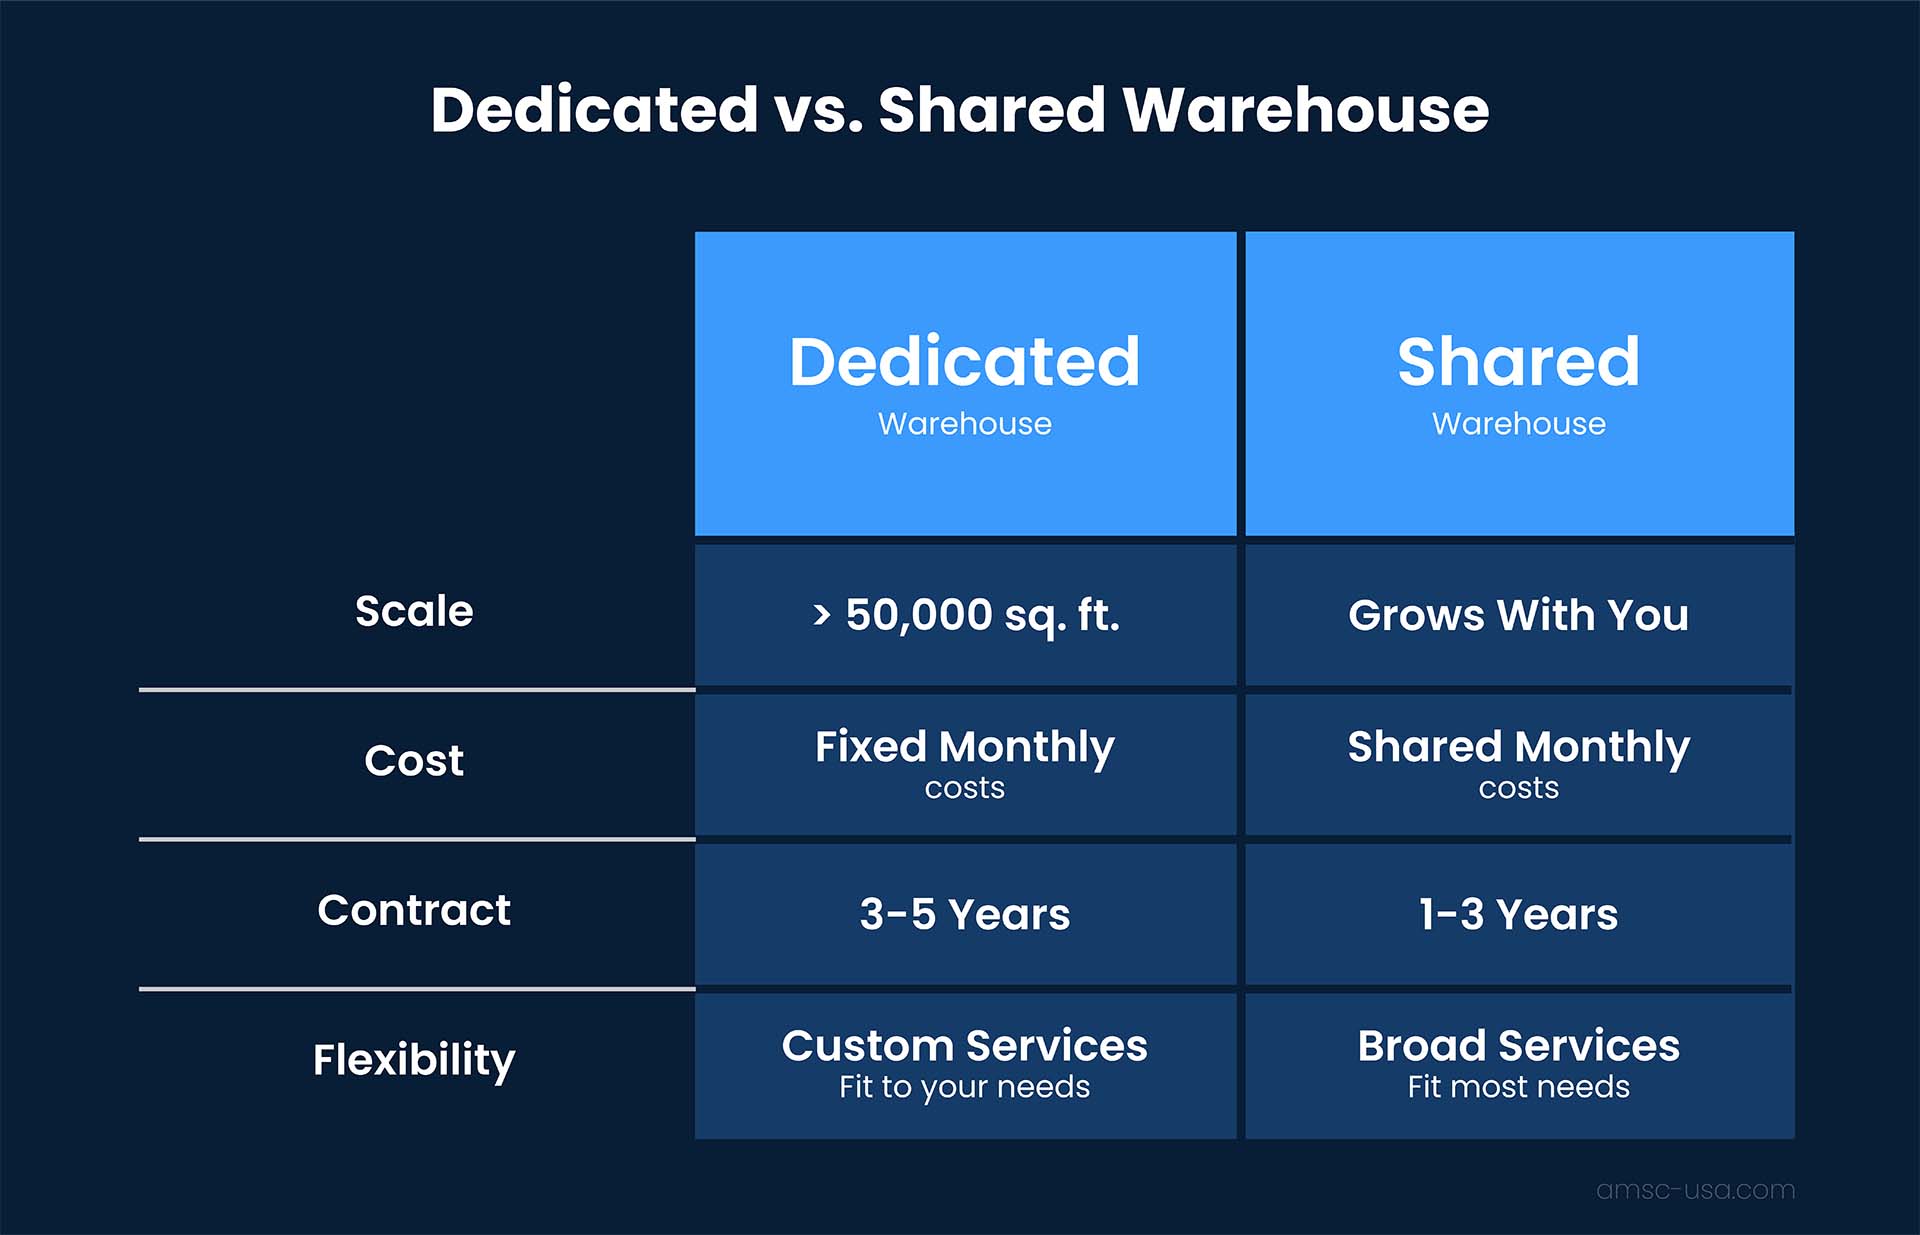 A table comparing dedicated and shared warehousing options